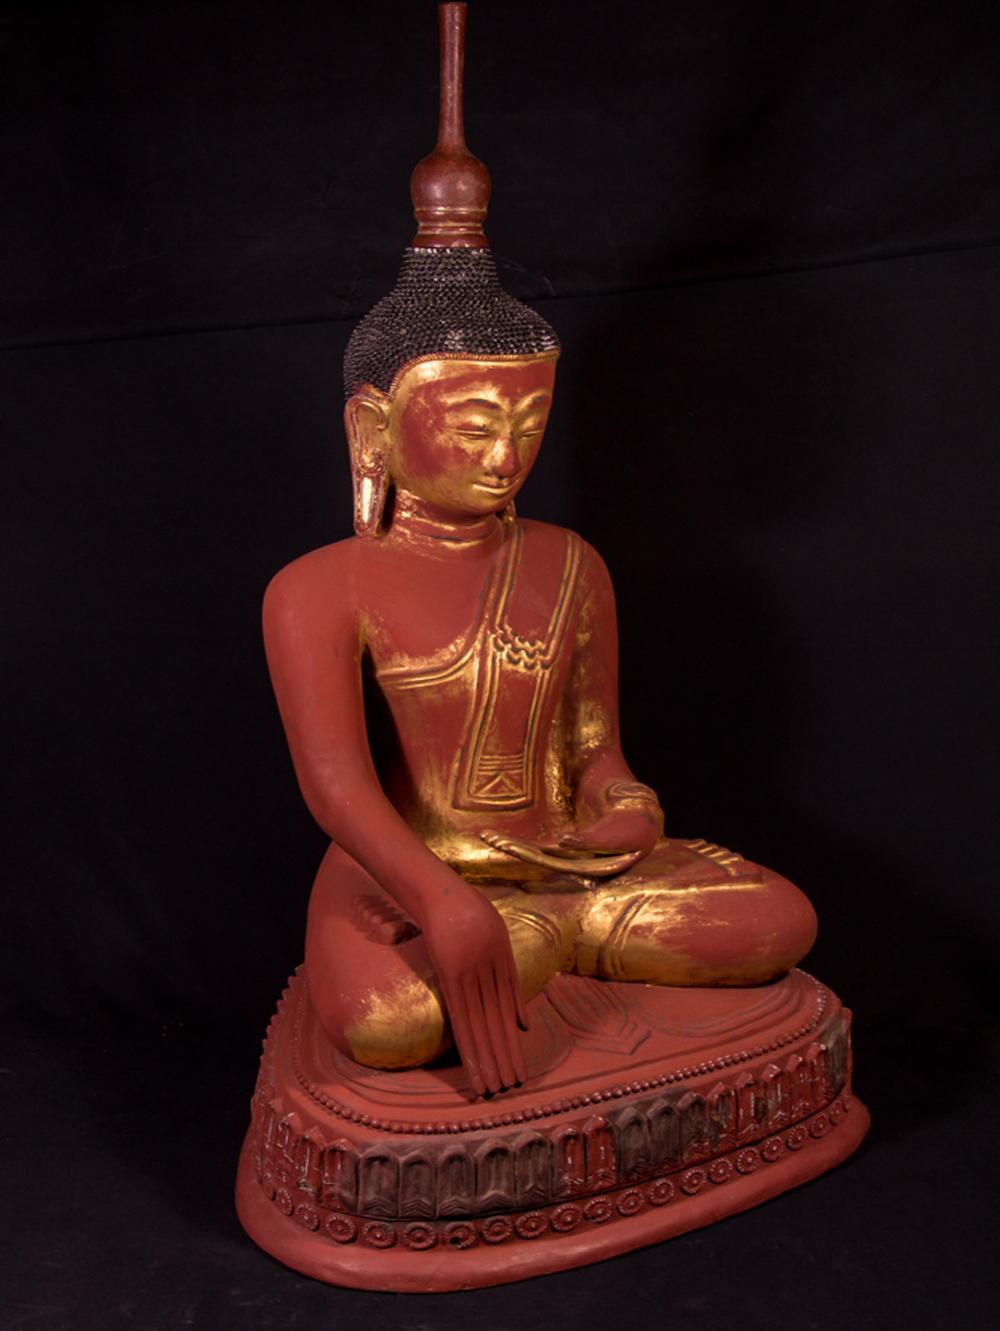 Material: lacquerware
120 cm high 
67 cm wide and 52 cm deep
Weight: 12.4 kgs
Gilded with 24 krt. gold
Ava style
Bhumisparsha mudra
Originating from Burma
19th century
Very special !

 